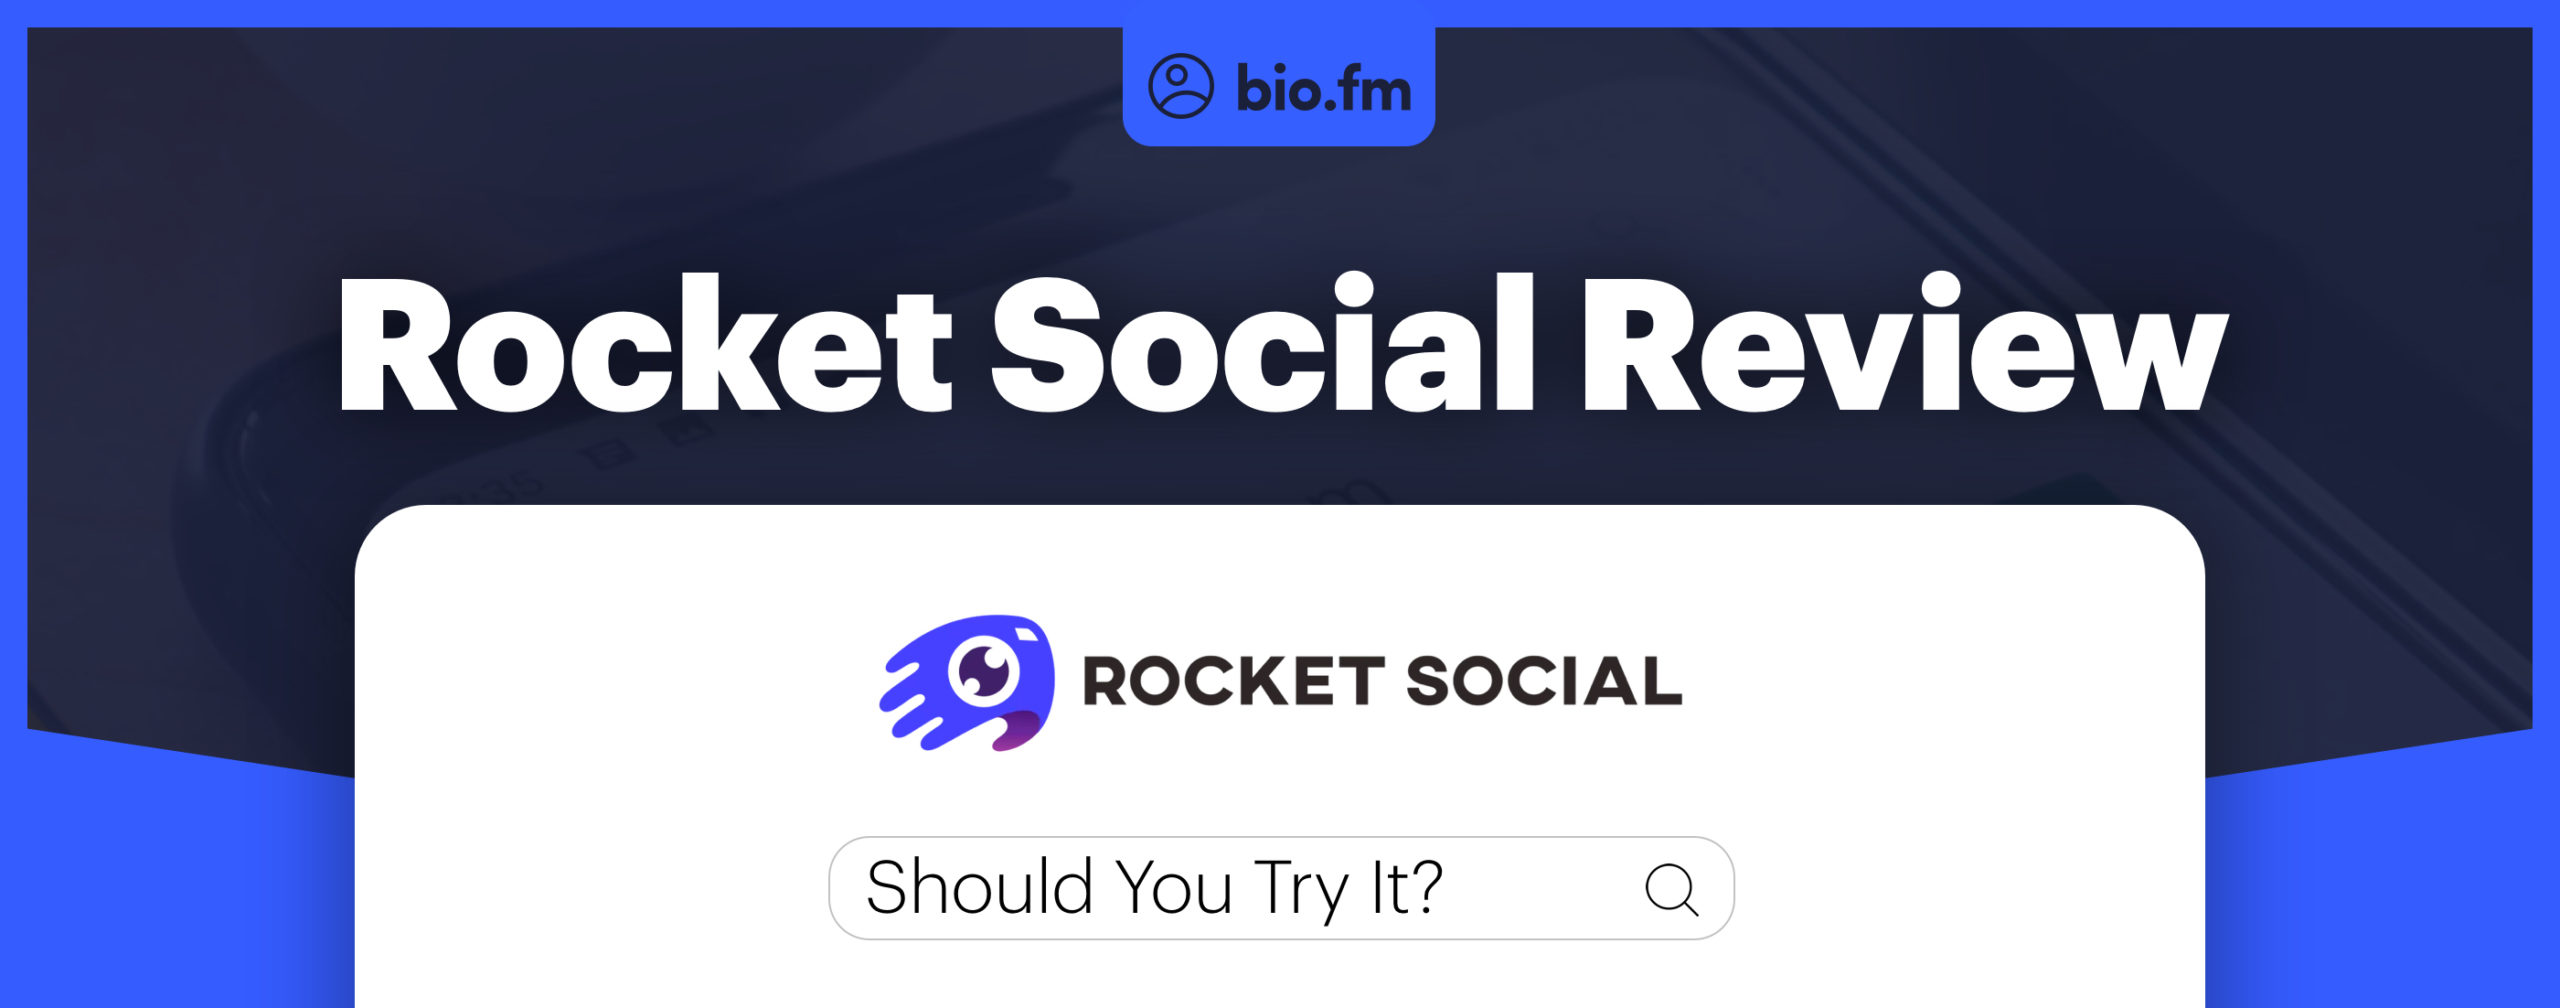 rocketsocial review featured image